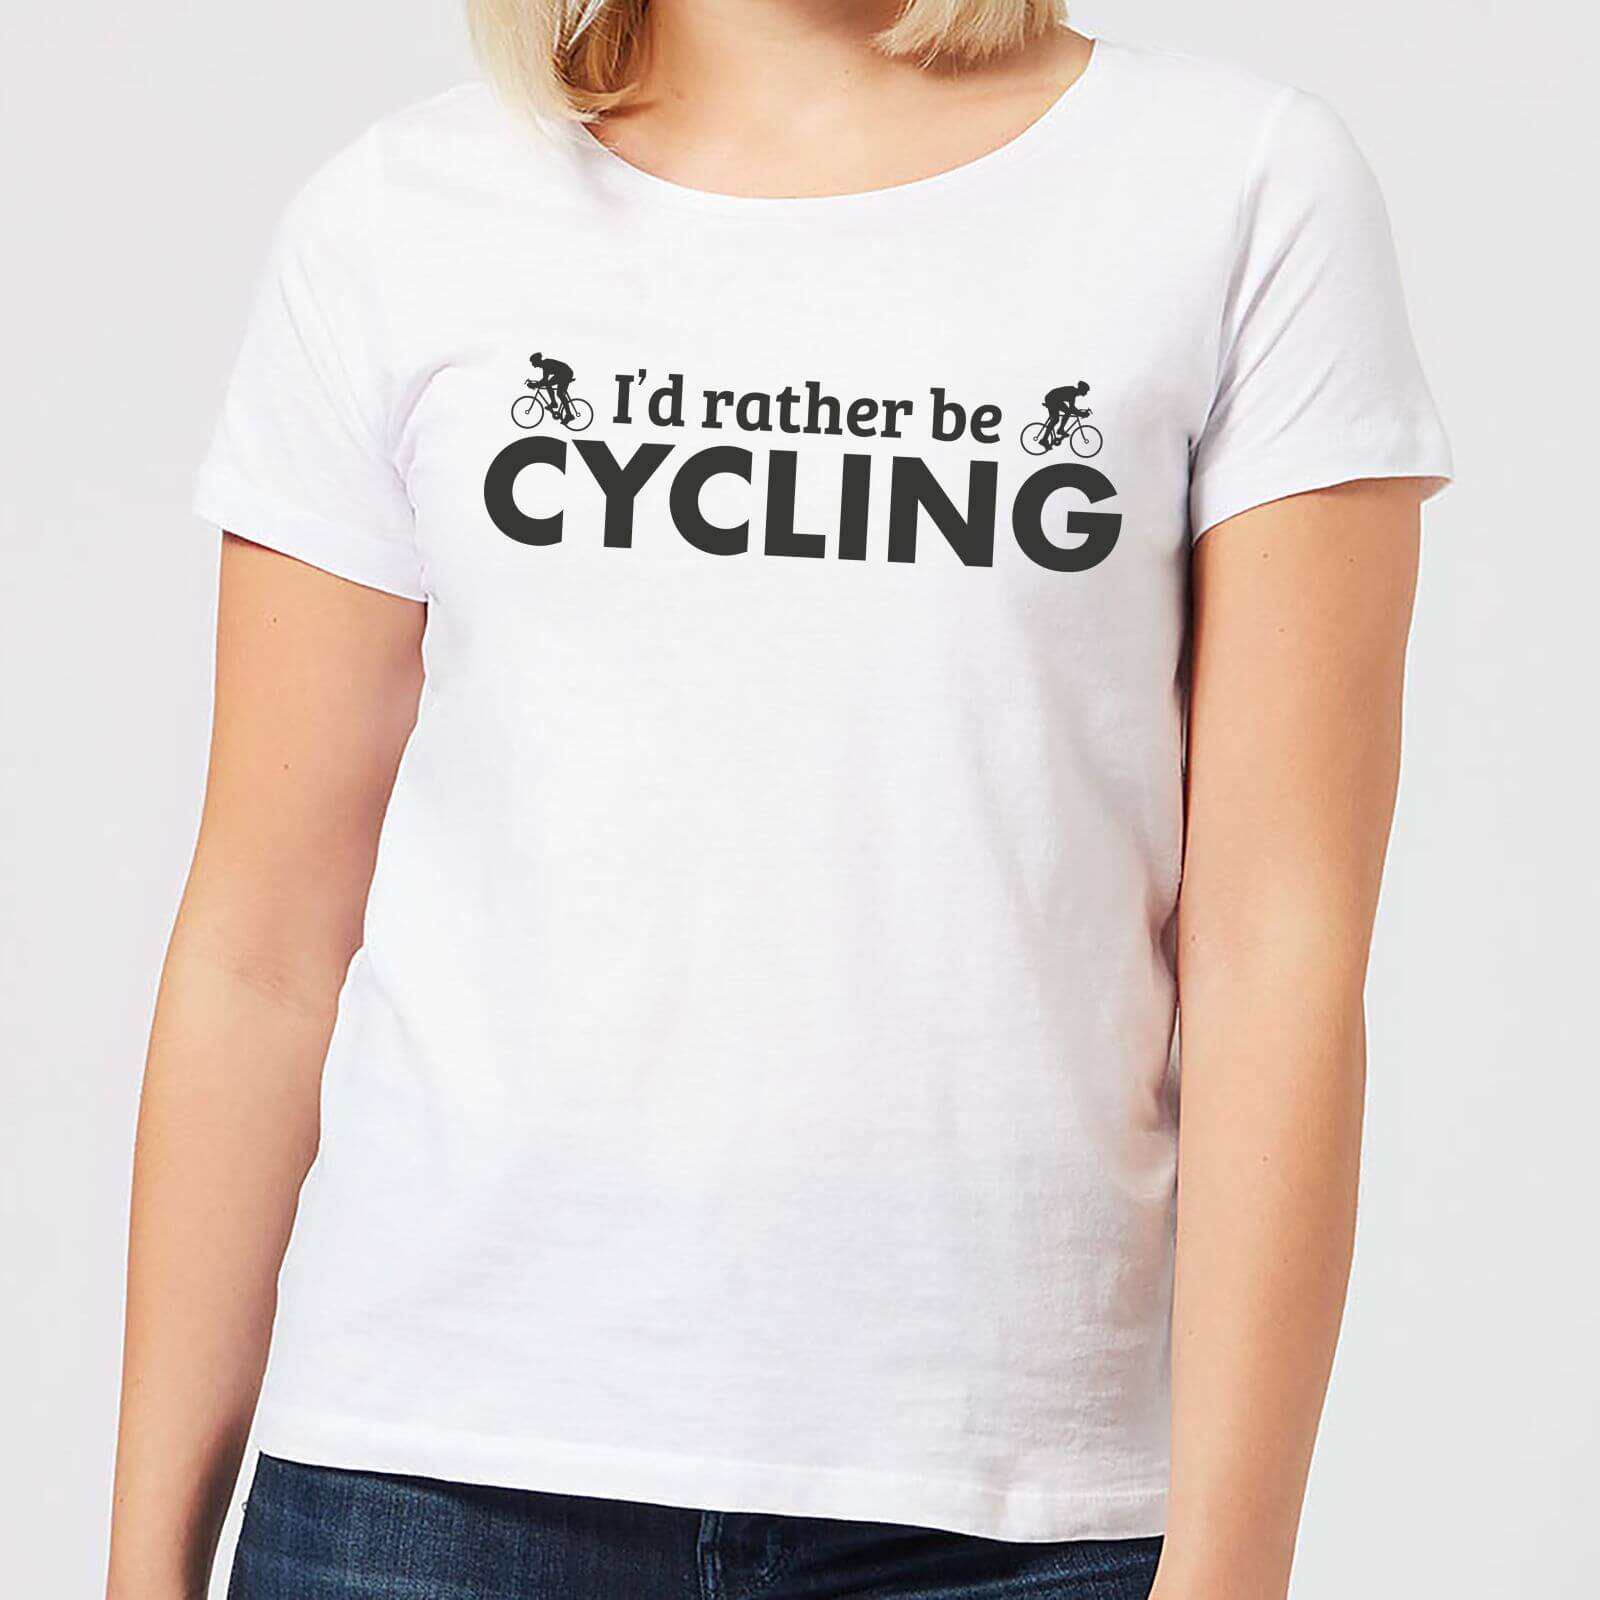 I'd Rather be Cycling Women's T-Shirt - White - XS - Weiß